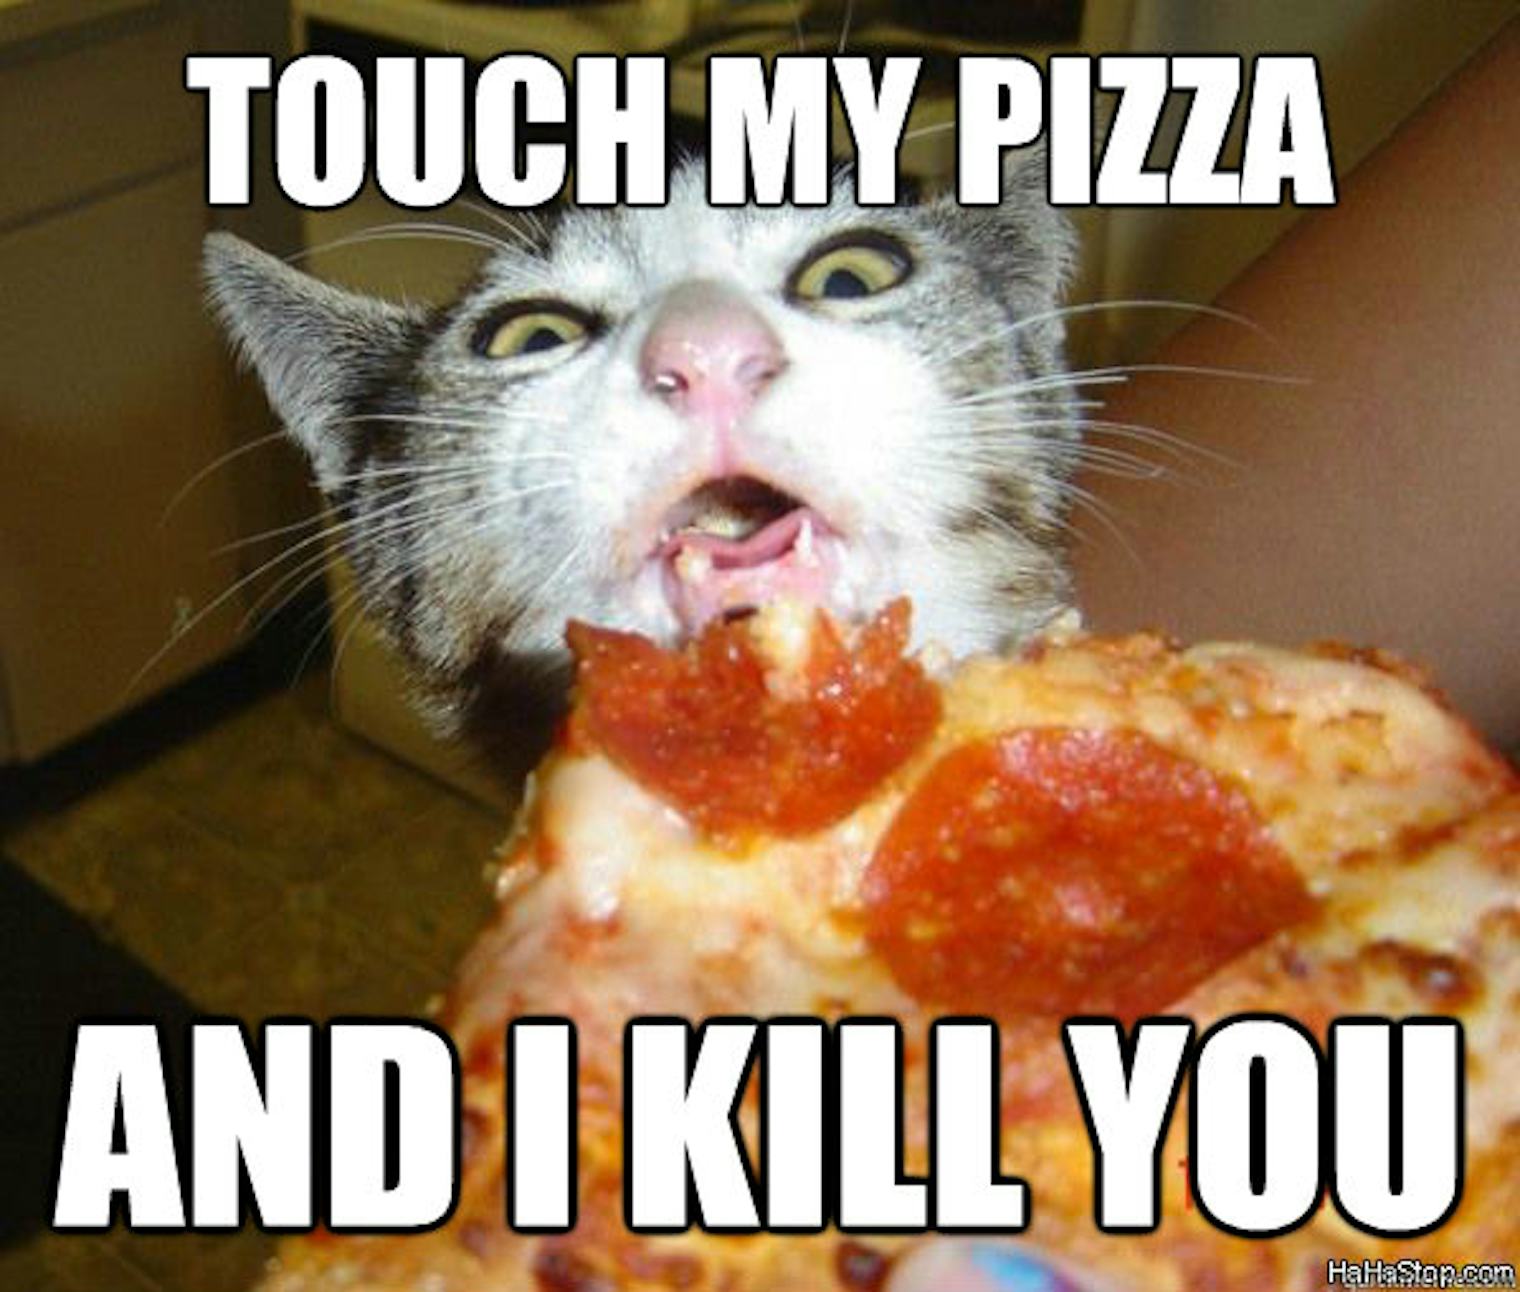 8 Pizza Memes For National Pizza Day That Appropriately Honor The